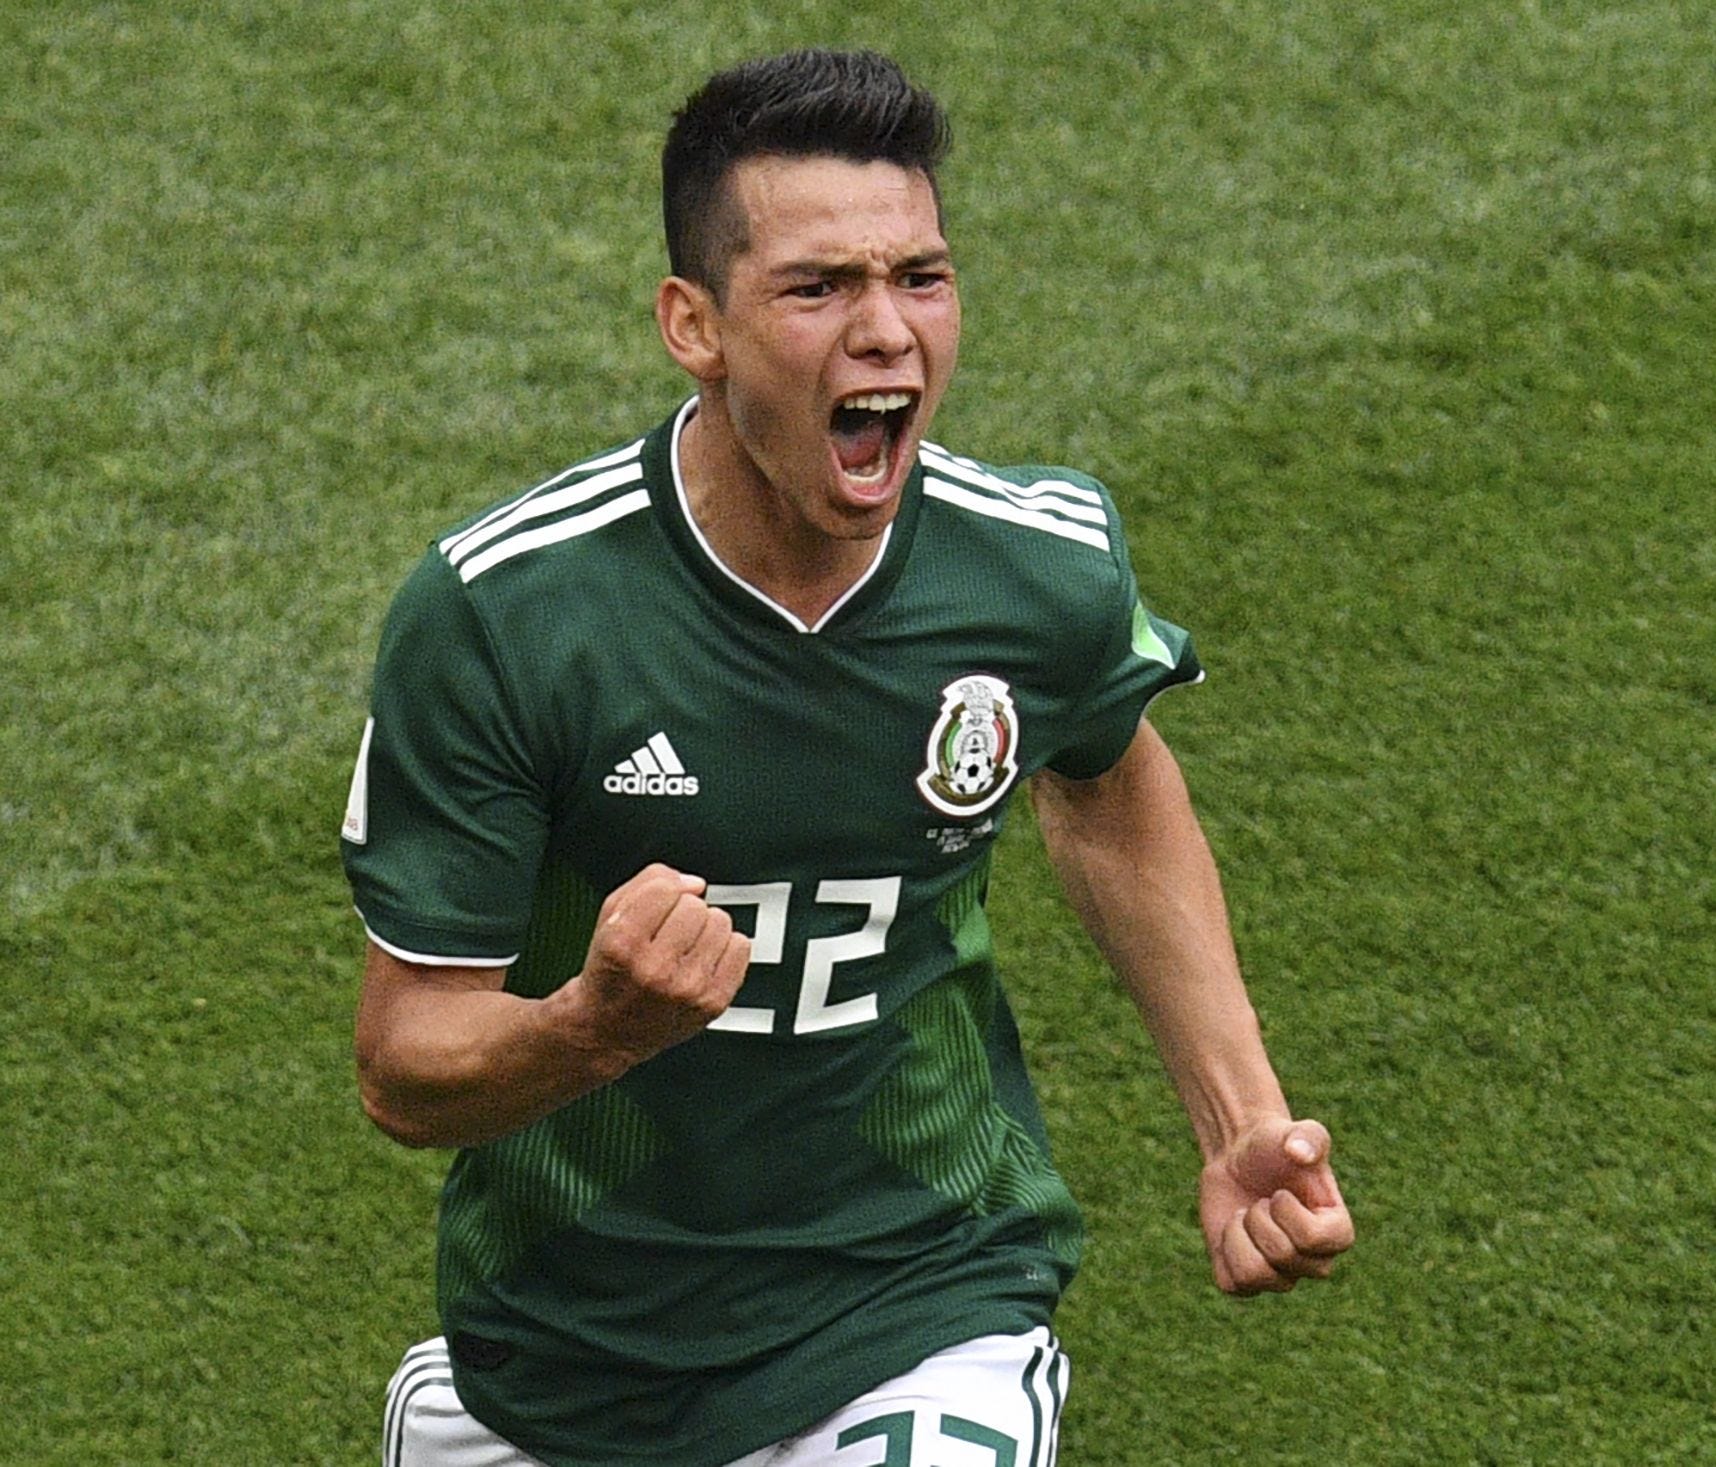 Hirving Lozano celebrates after scoring against Germany.